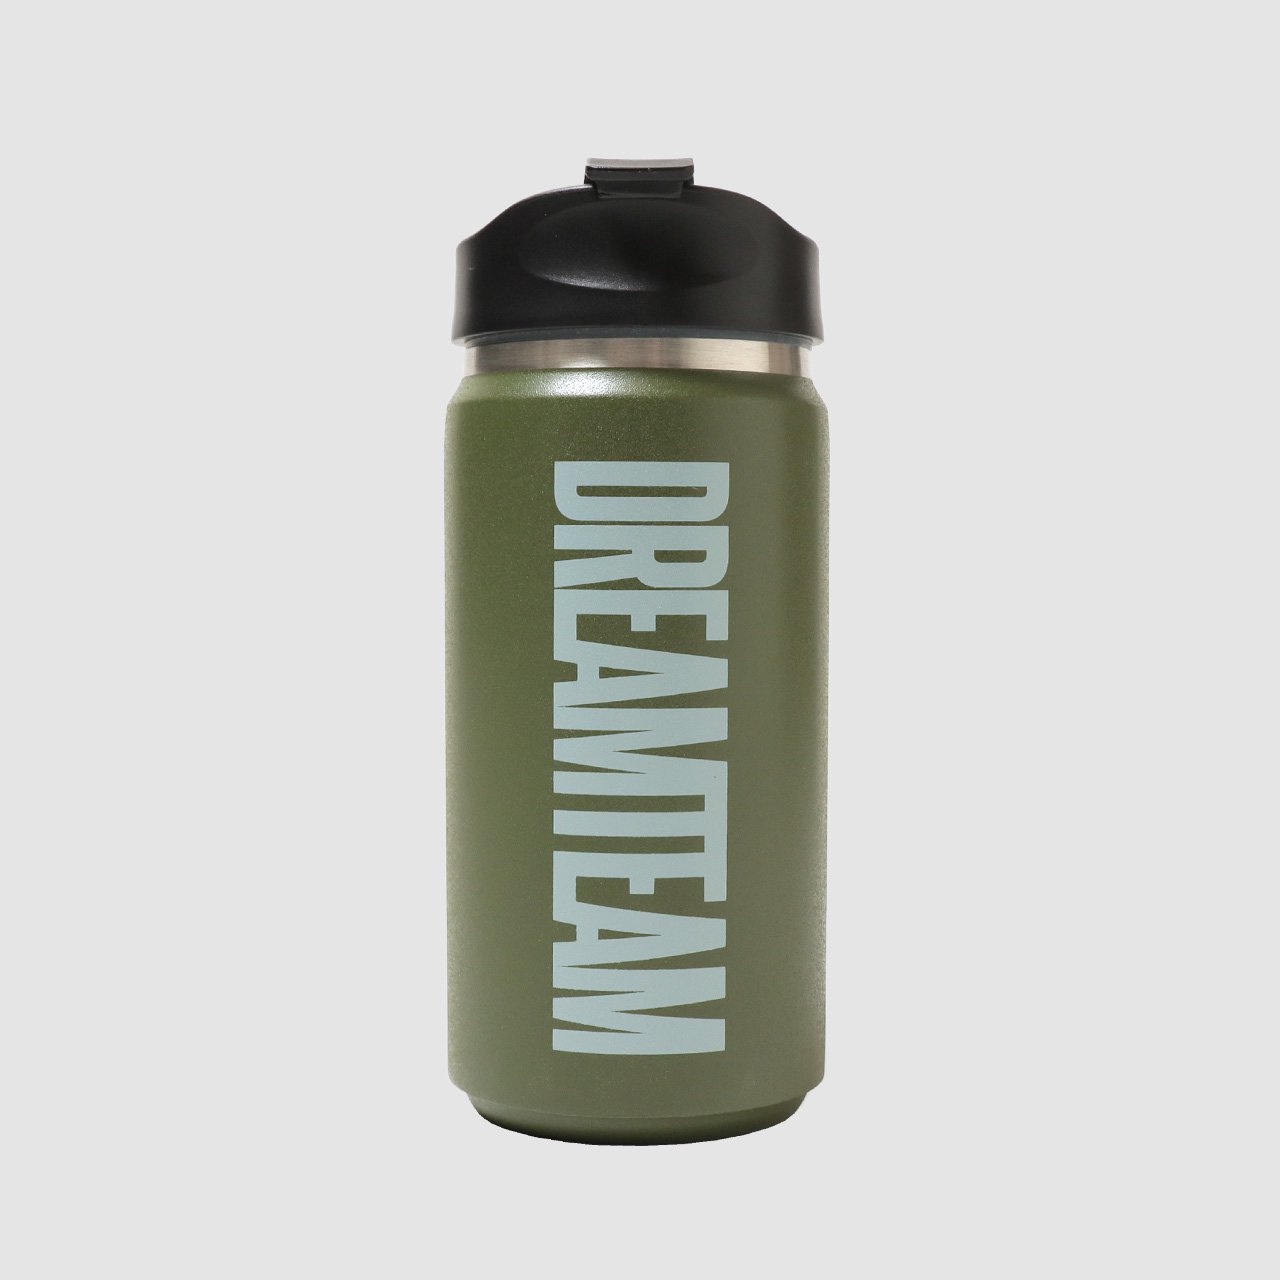 <img class='new_mark_img1' src='https://img.shop-pro.jp/img/new/icons20.gif' style='border:none;display:inline;margin:0px;padding:0px;width:auto;' />DREAMTEAM Logo Thermo Tumbler